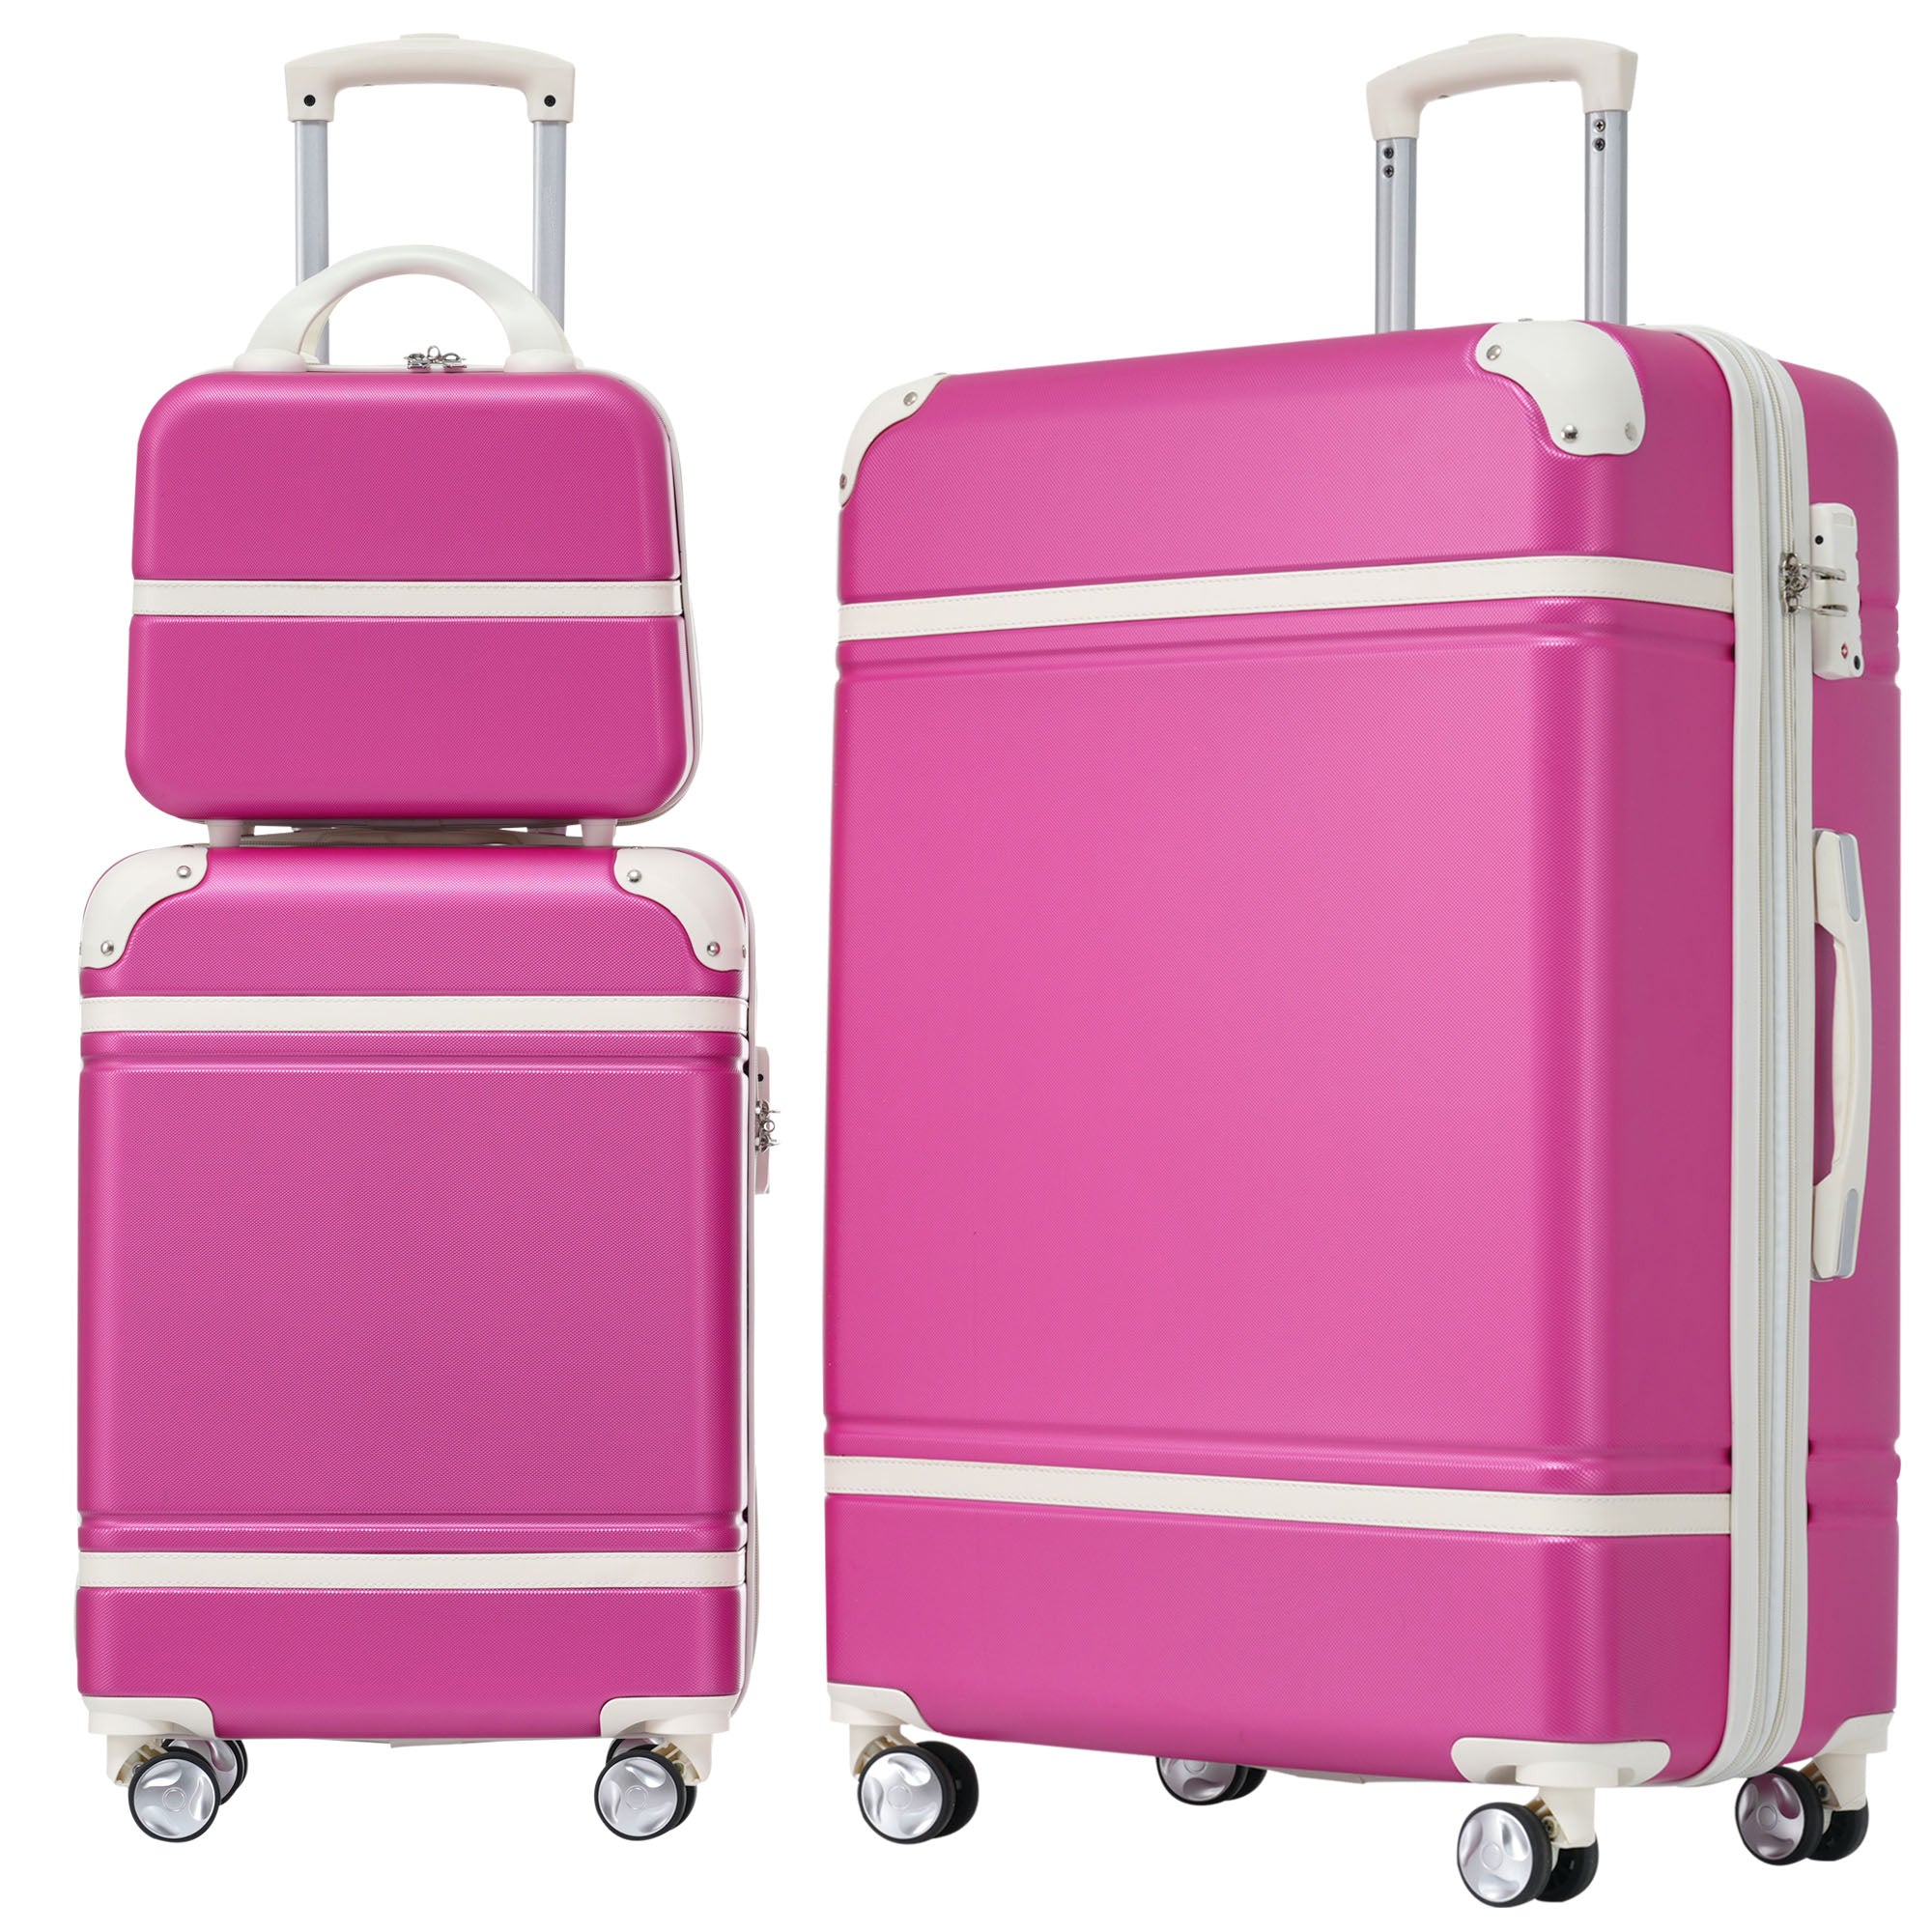 Hardshell Luggage Sets 3 Pieces 20" 28" Luggages and pink-abs